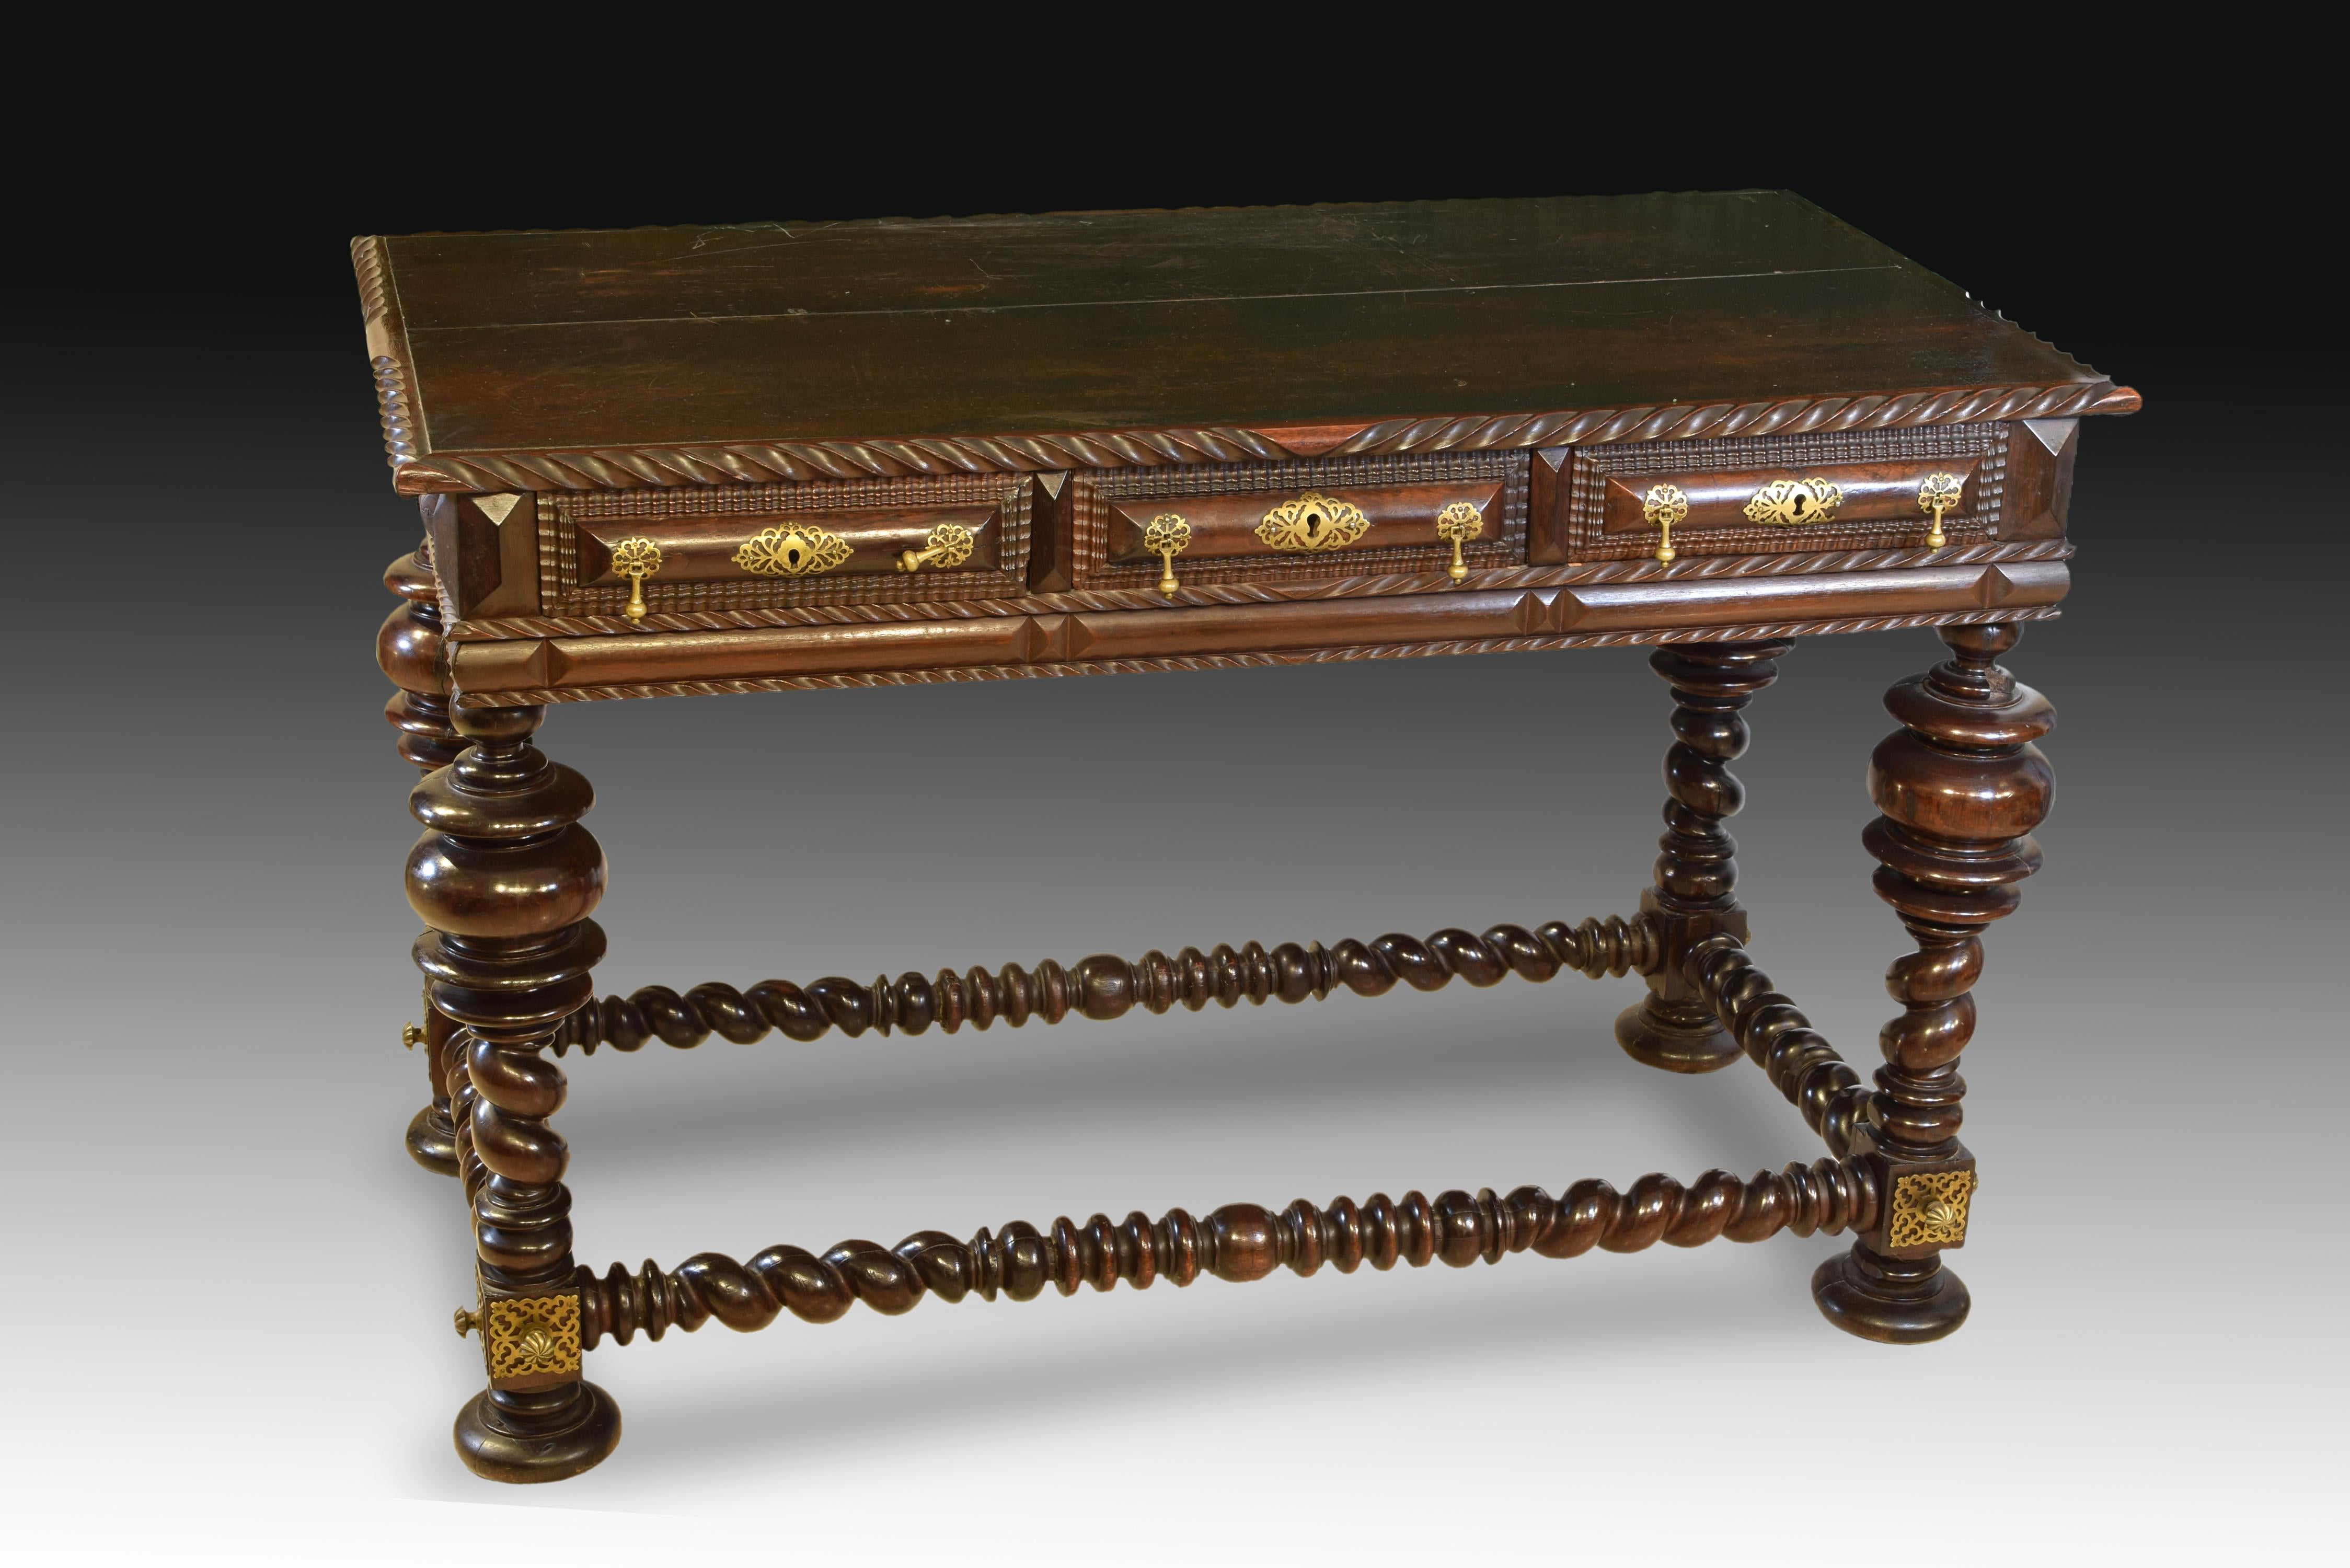 Table. Rosewood wood. Portuguese school, 18th and 19th centuries. 
 Rectangular carved wooden table with three front drawers with lock escutcheons and gold metal handles, which has four turned legs with thick discs and solomonic areas, joined